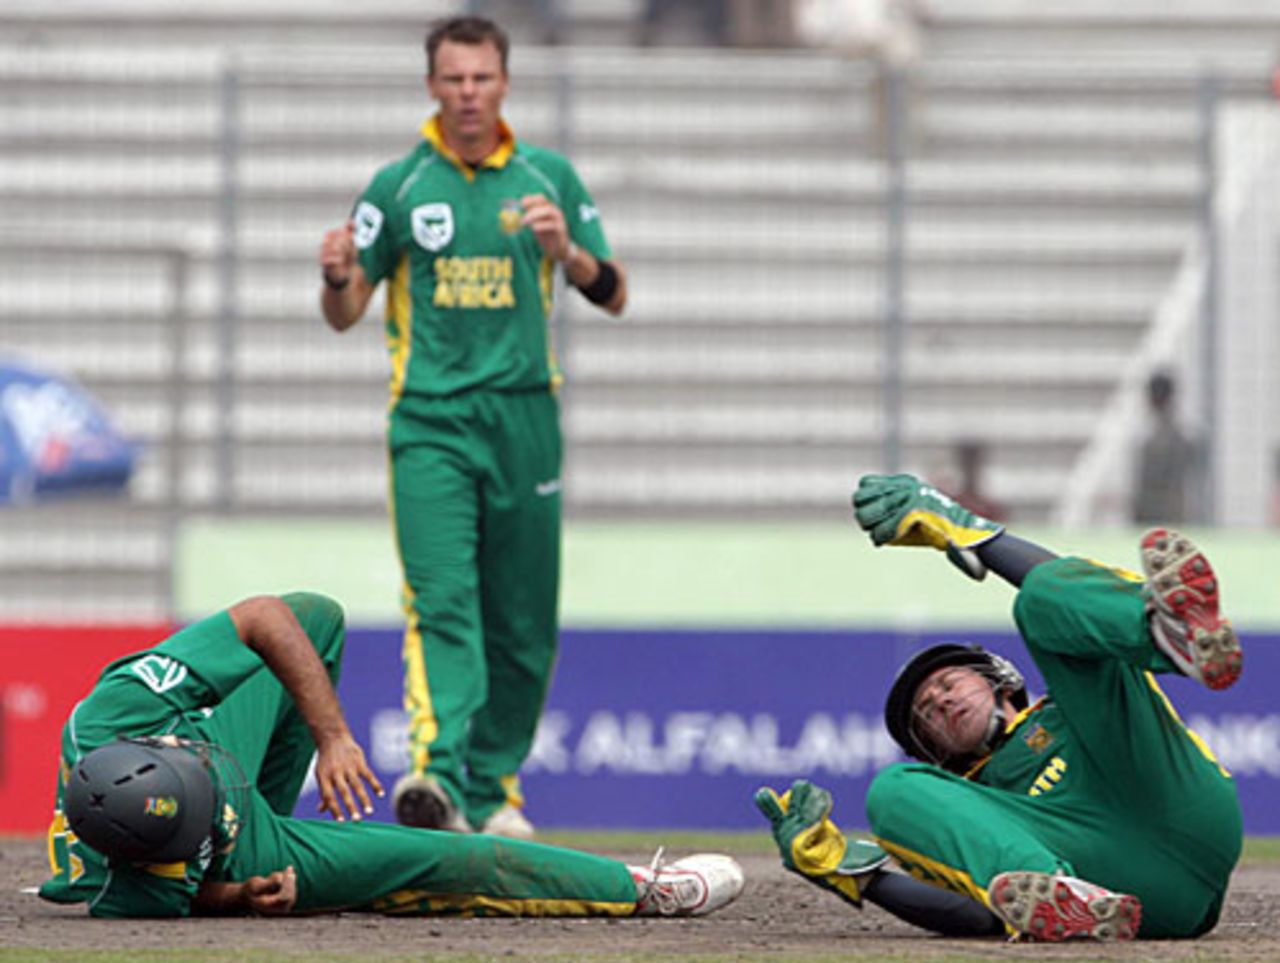 AB de Villiers and Hashim Amla lie on the ground after attempting a catch, Bangladesh v South Africa, 3rd ODI, Mirpur, March 14, 2008 
